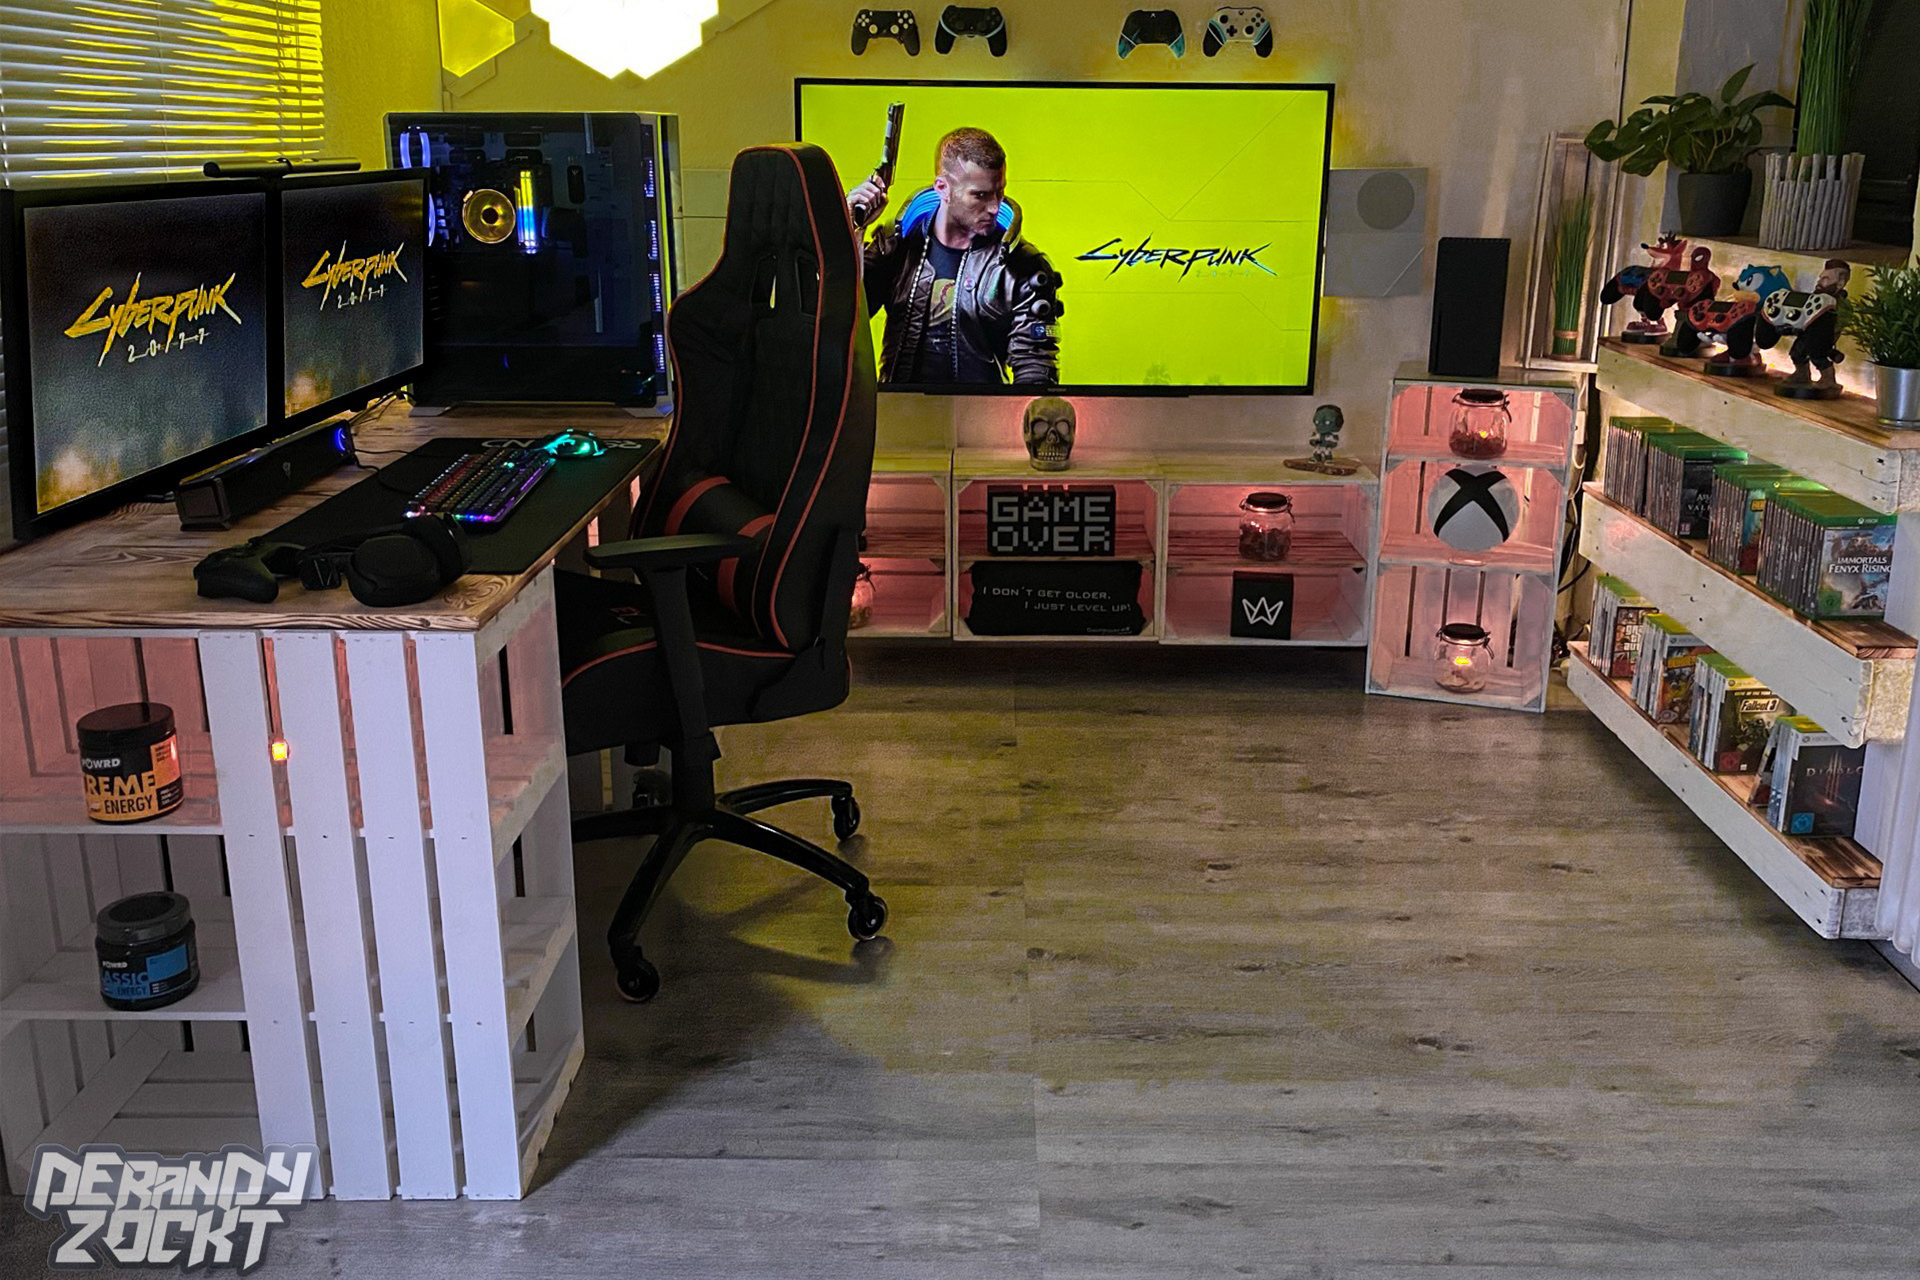 PC Room Setup - The Ultimate Guide To Setting Up Your Gaming Room